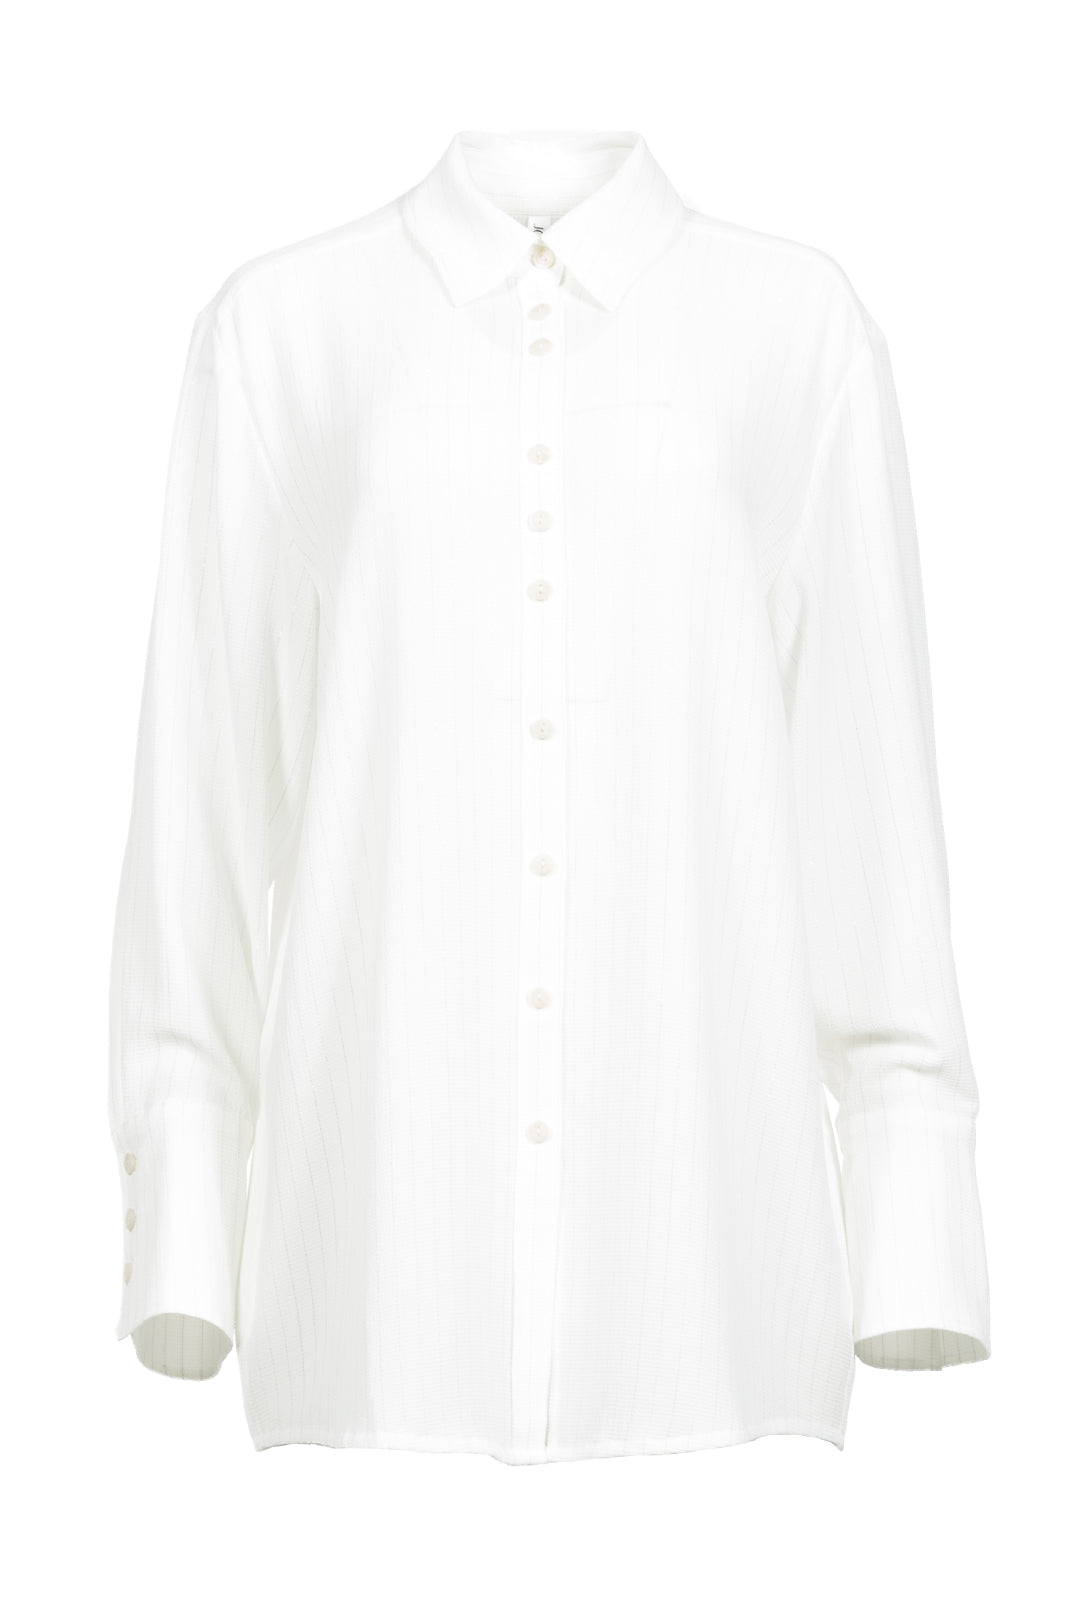 Ivory shirt with silver stripes | Valentine